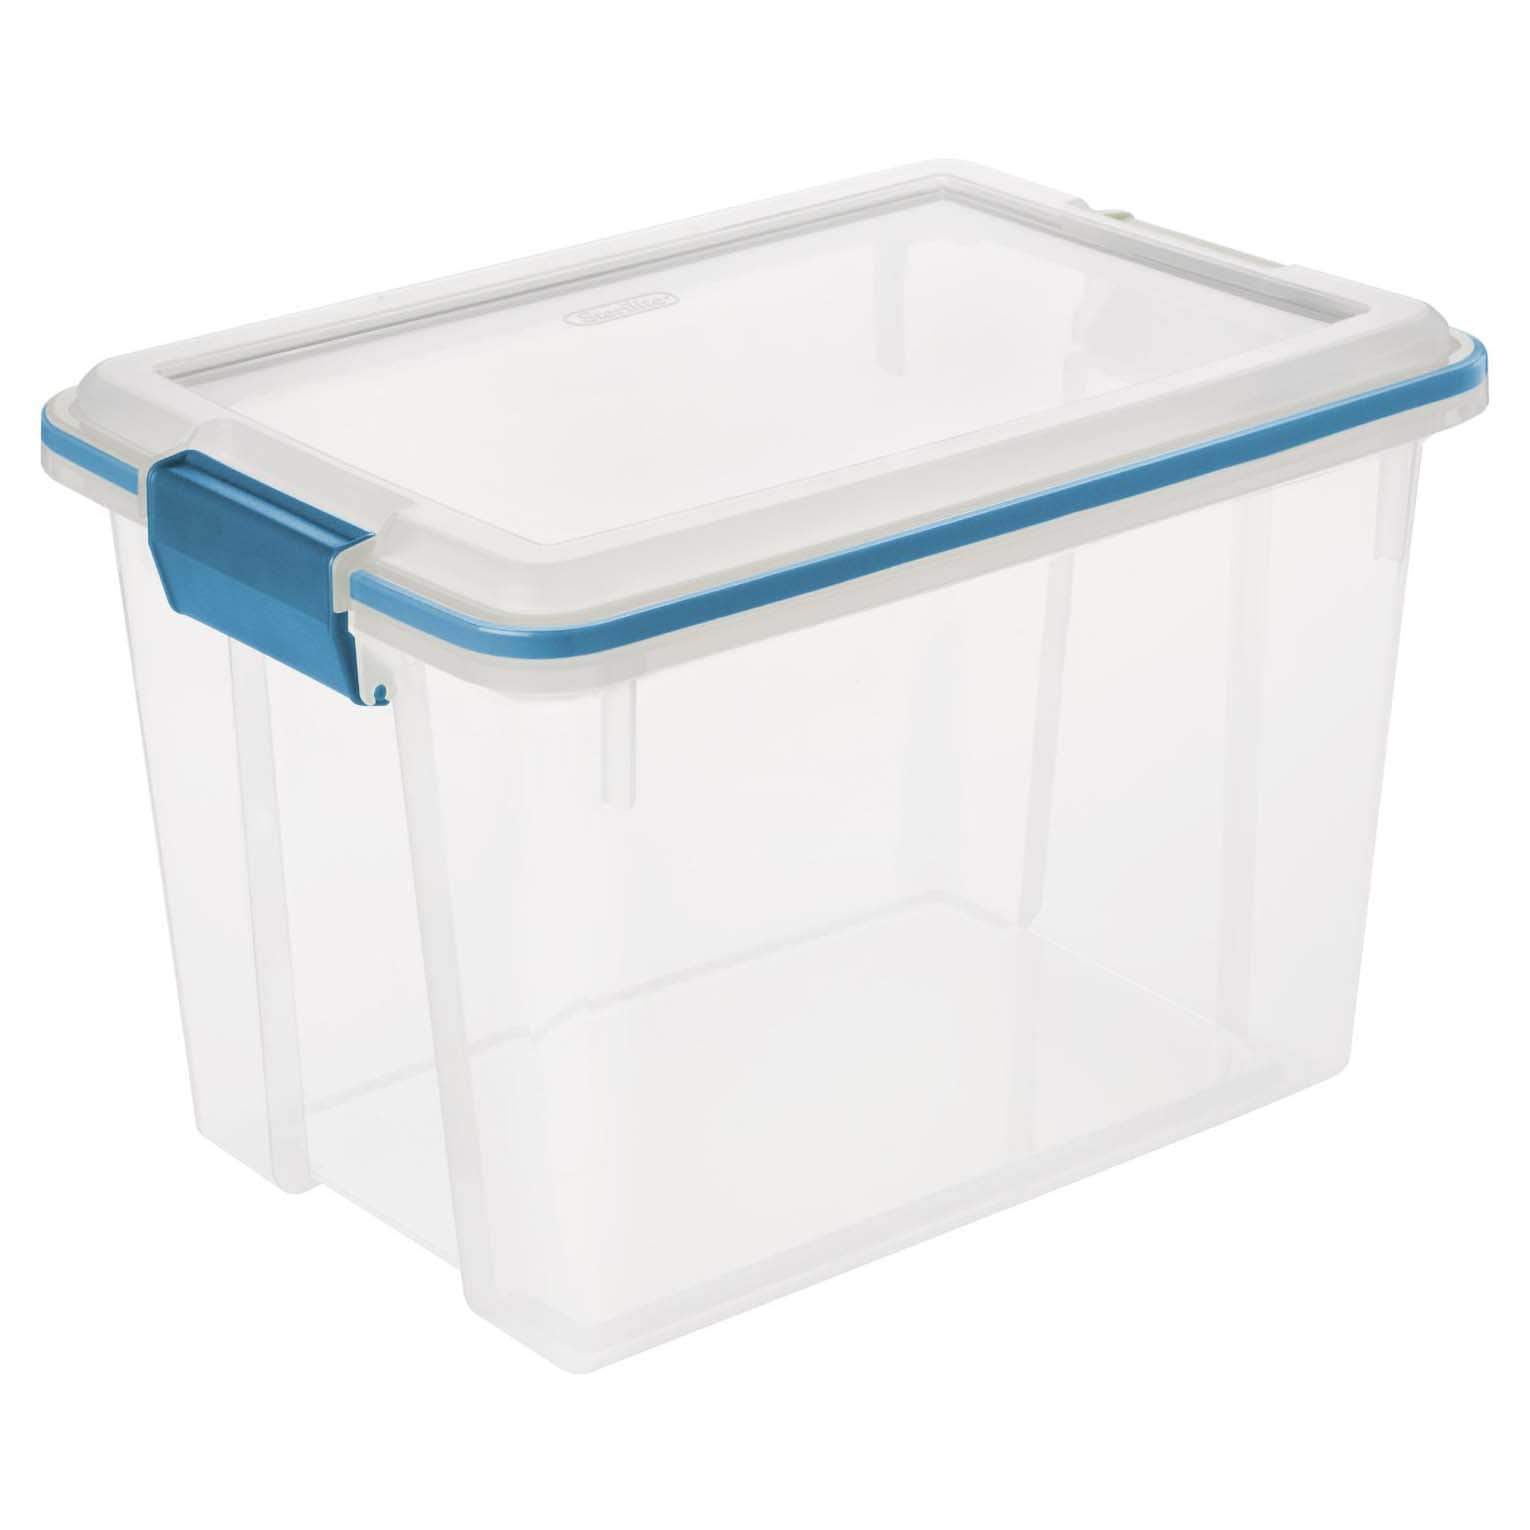  Sterilite 30 Gal Gasket Tote, Heavy Duty Stackable Storage Bin  with Latching Lid, Plastic Container to Organize Basement, Gray Base and  Lid, 3-Pack